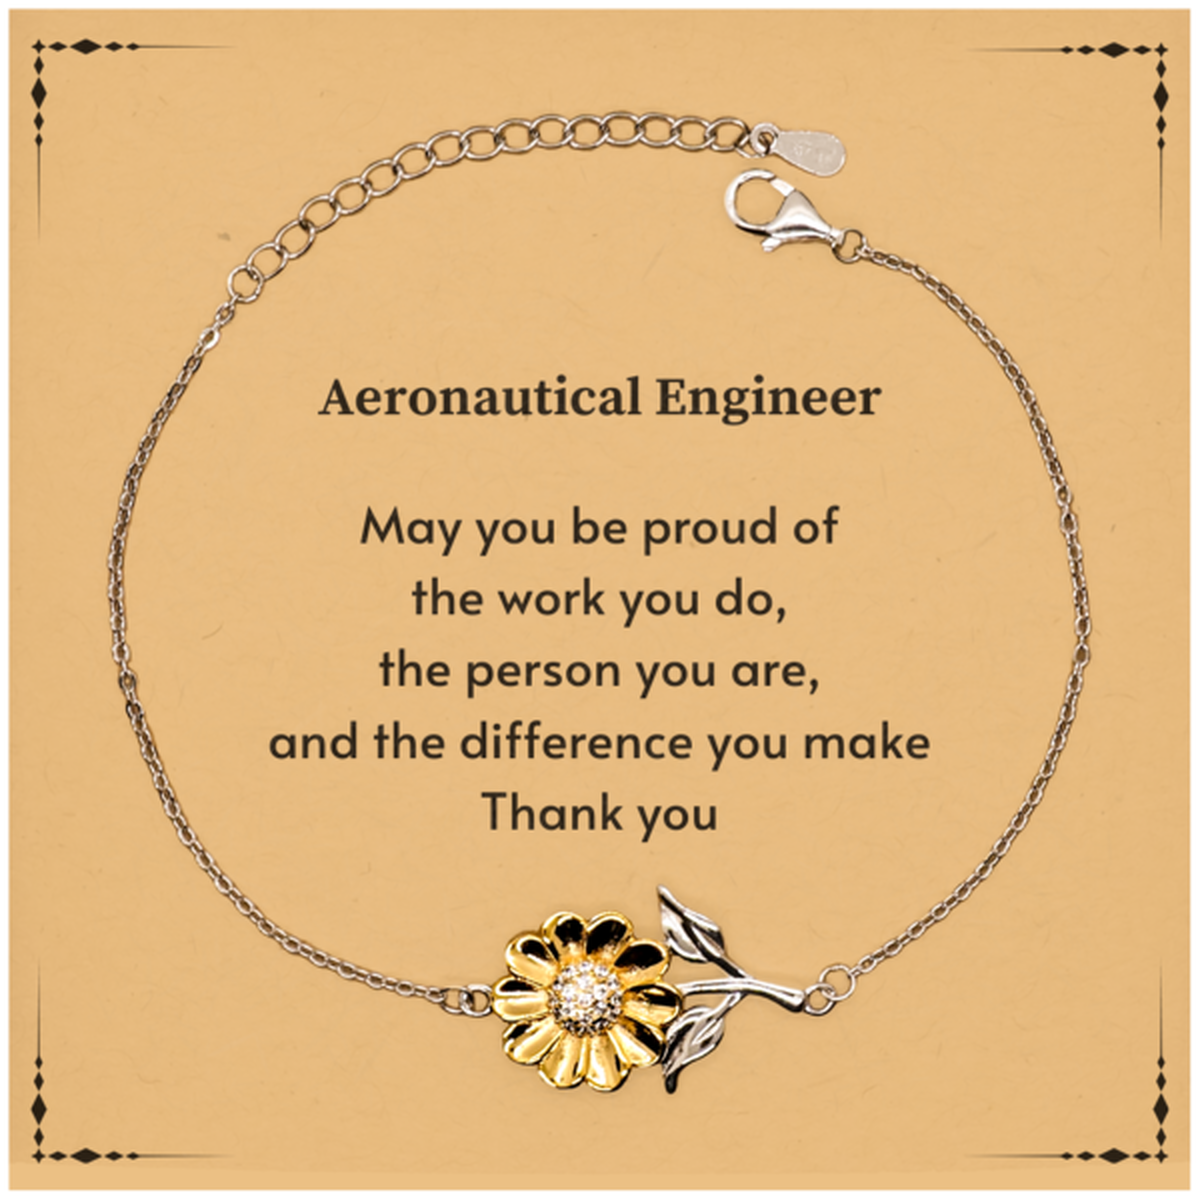 Heartwarming Sunflower Bracelet Retirement Coworkers Gifts for Aeronautical Engineer, Aeronautical Engineer May You be proud of the work you do, the person you are Gifts for Boss Men Women Friends